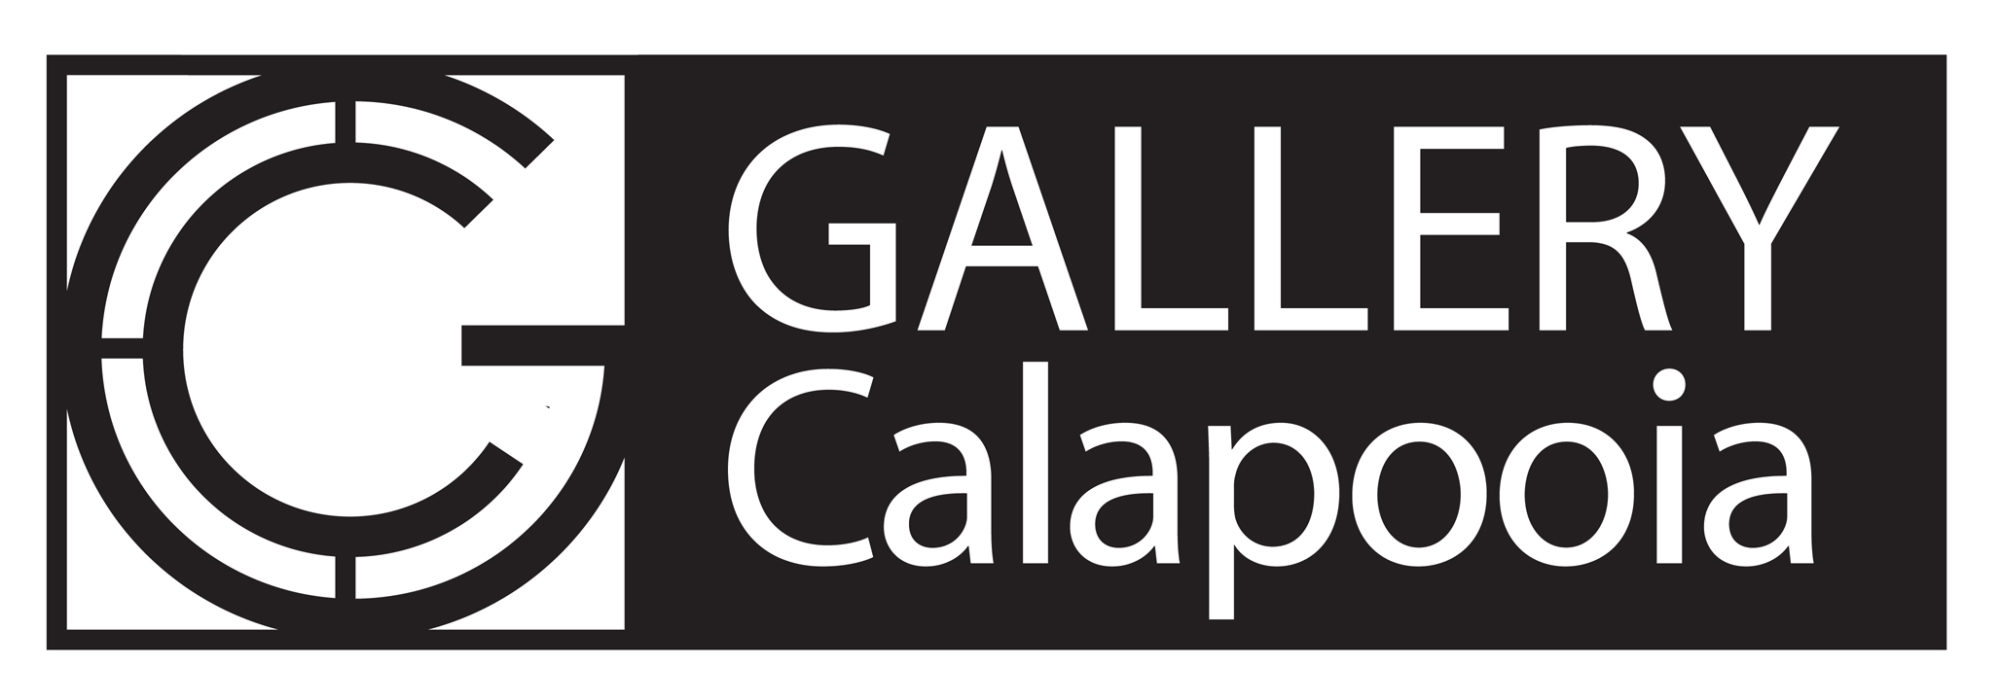 Gallery Calapooia